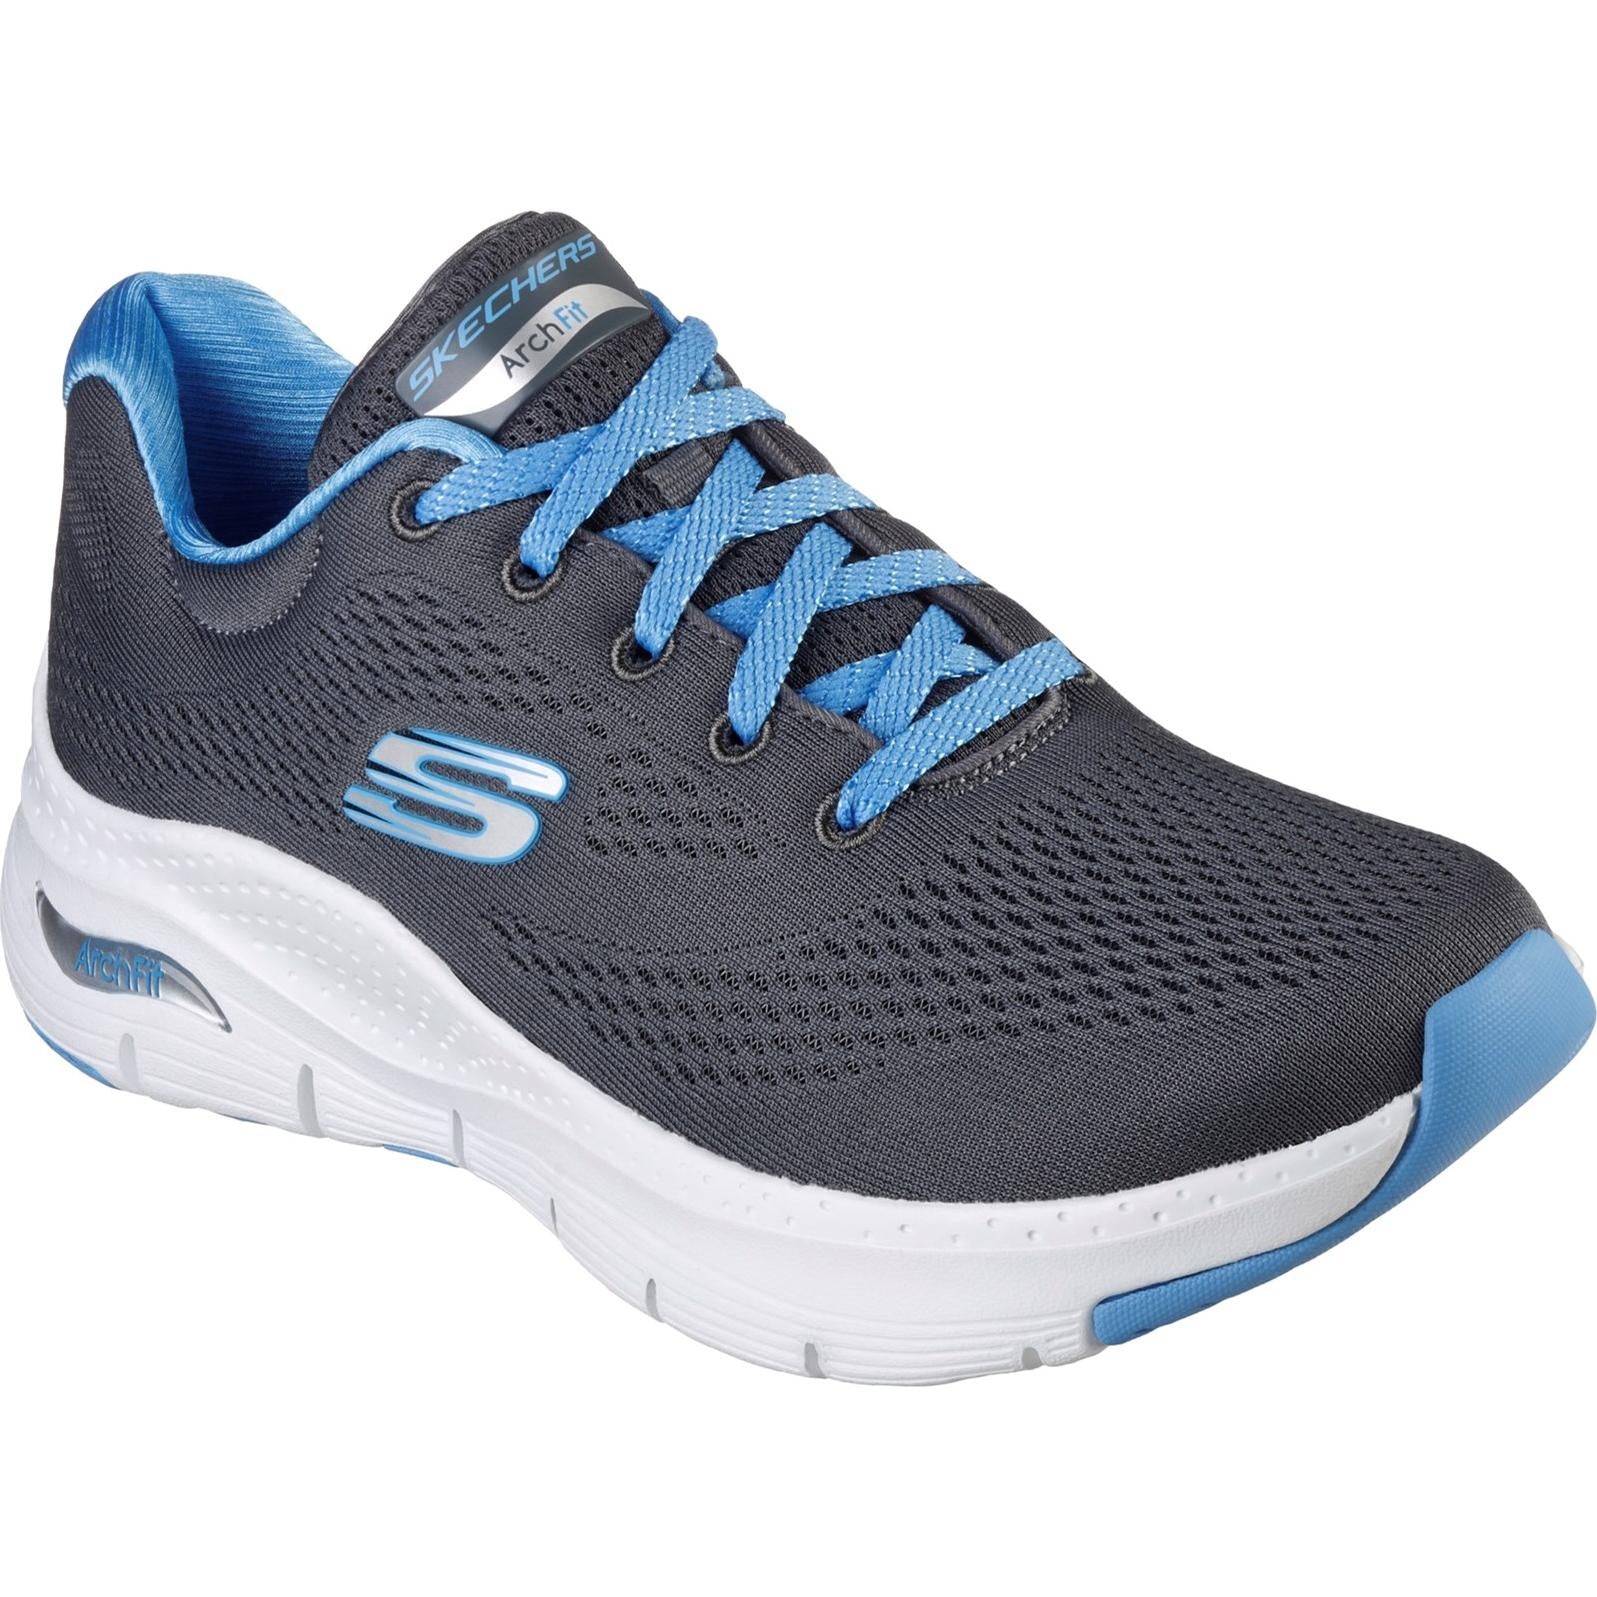 Skechers Arch Fit Sunny Outlook Sports Shoe